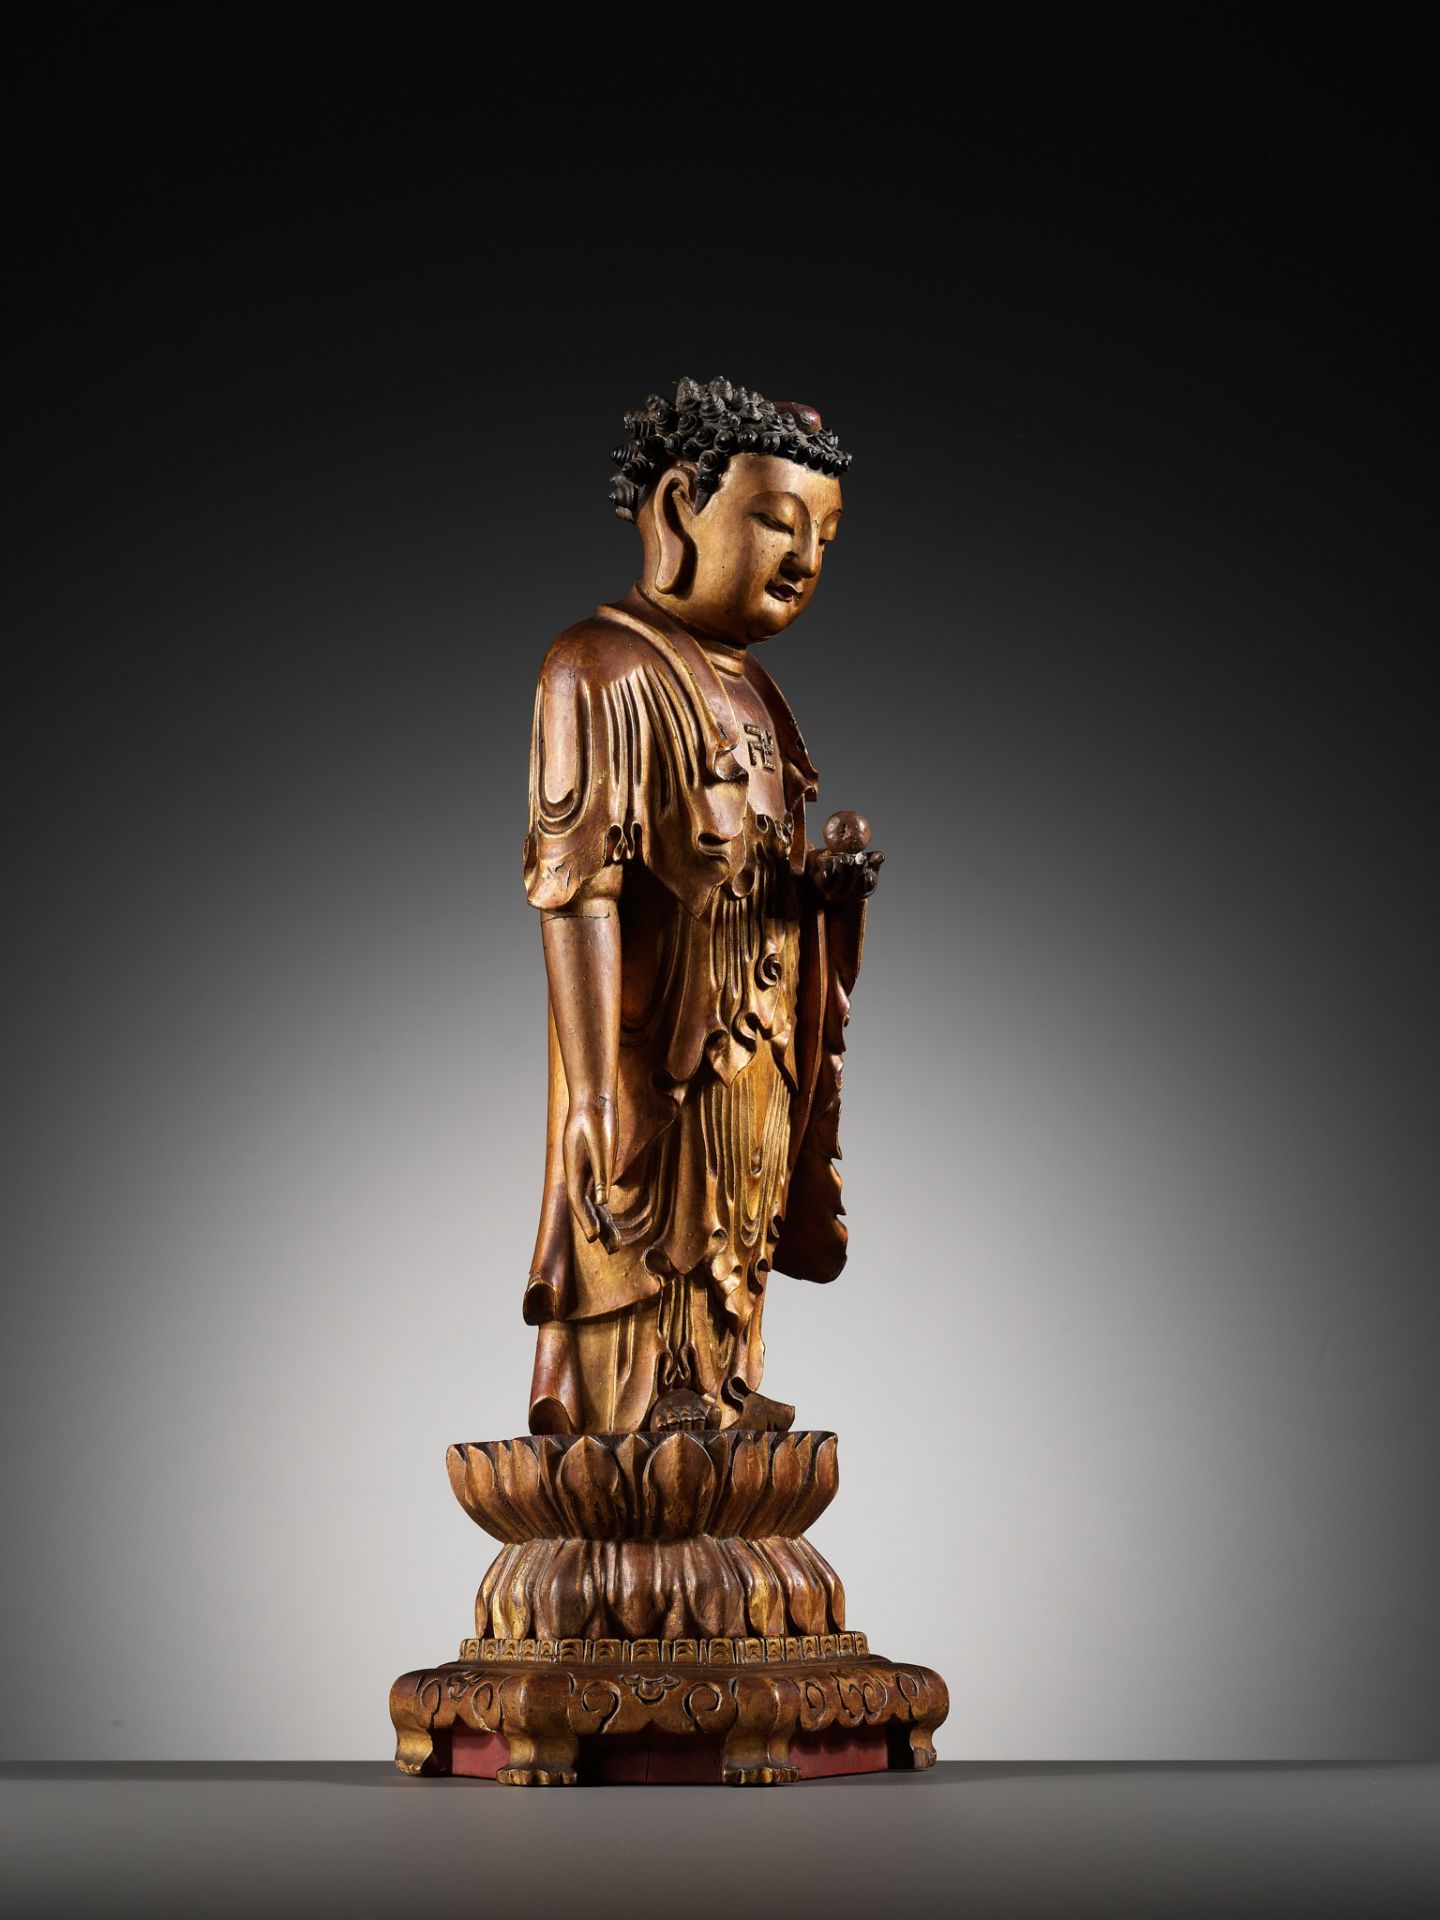 A LACQUER-GILT WOOD FIGURE OF THE STANDING BUDDHA, CHINA, 17TH - 18TH CENTURY - Image 14 of 15